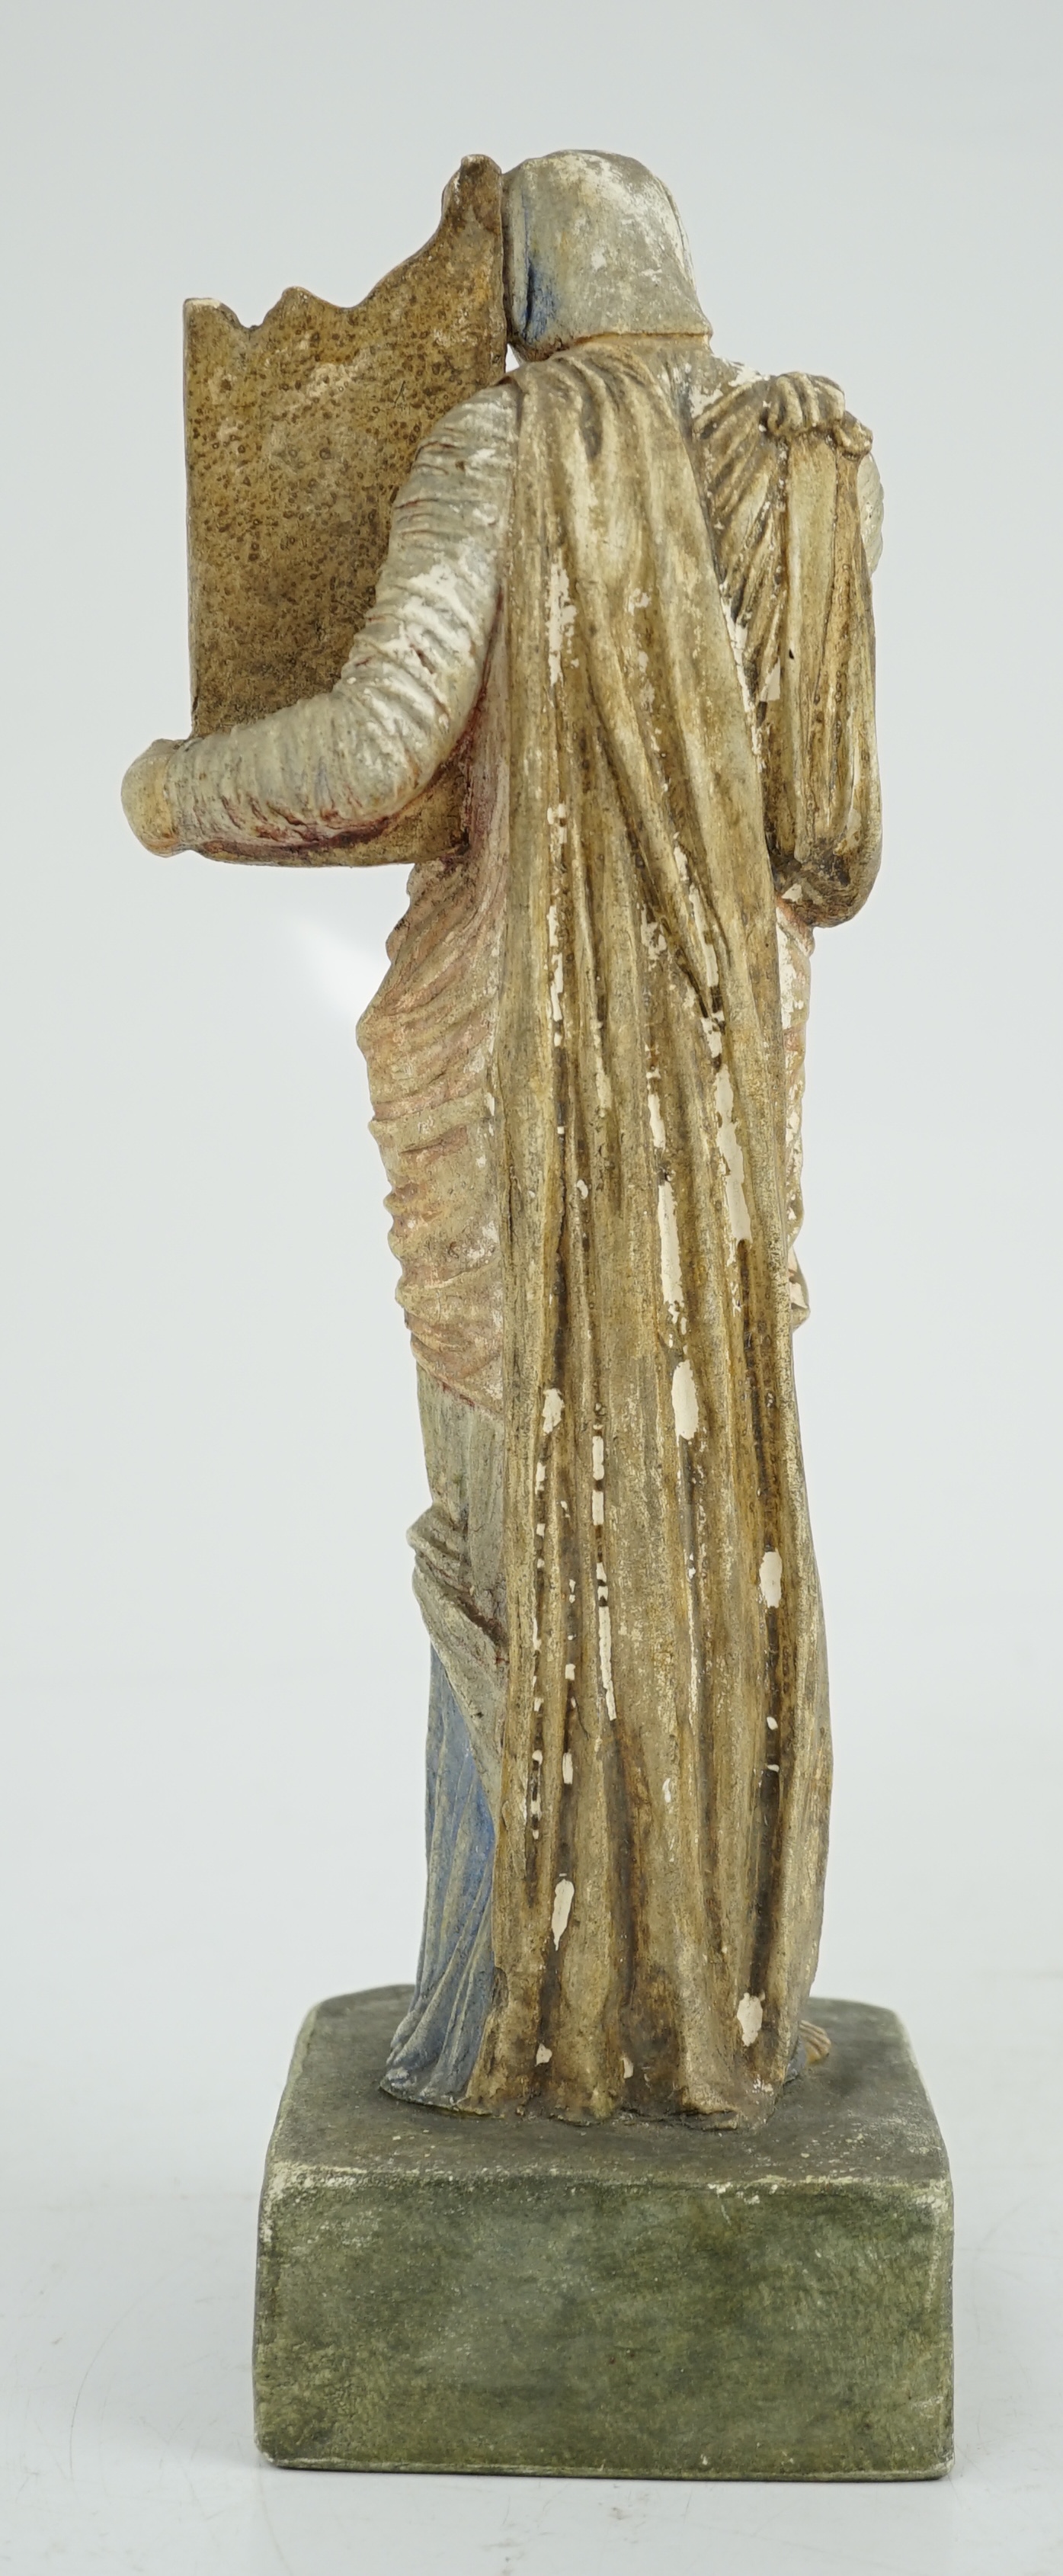 A Compton tempera painted pottery figure of St Cecilia, early 20th century, losses to paint